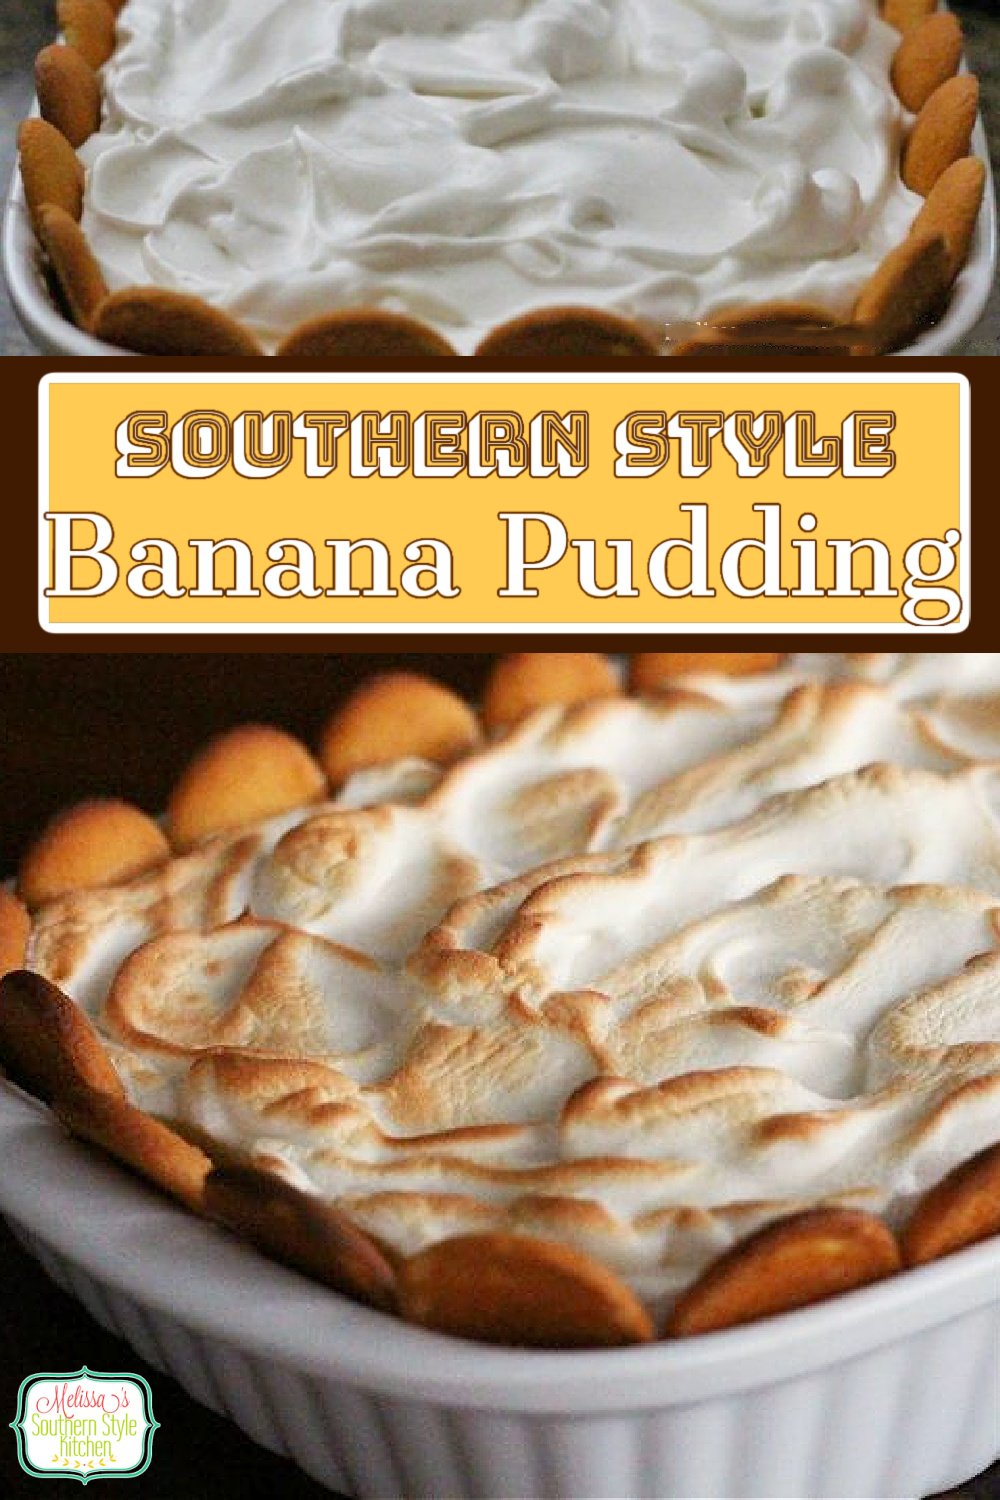 This vintage Old Fashioned Banana Pudding is a dessert rockstar. #bananapudding #southernbananapudding #desserts #dessertfoodrecipes #holidayrecipes #mothersday #easter #thanksgiving #southernfood #southernrecipes via @melissasssk